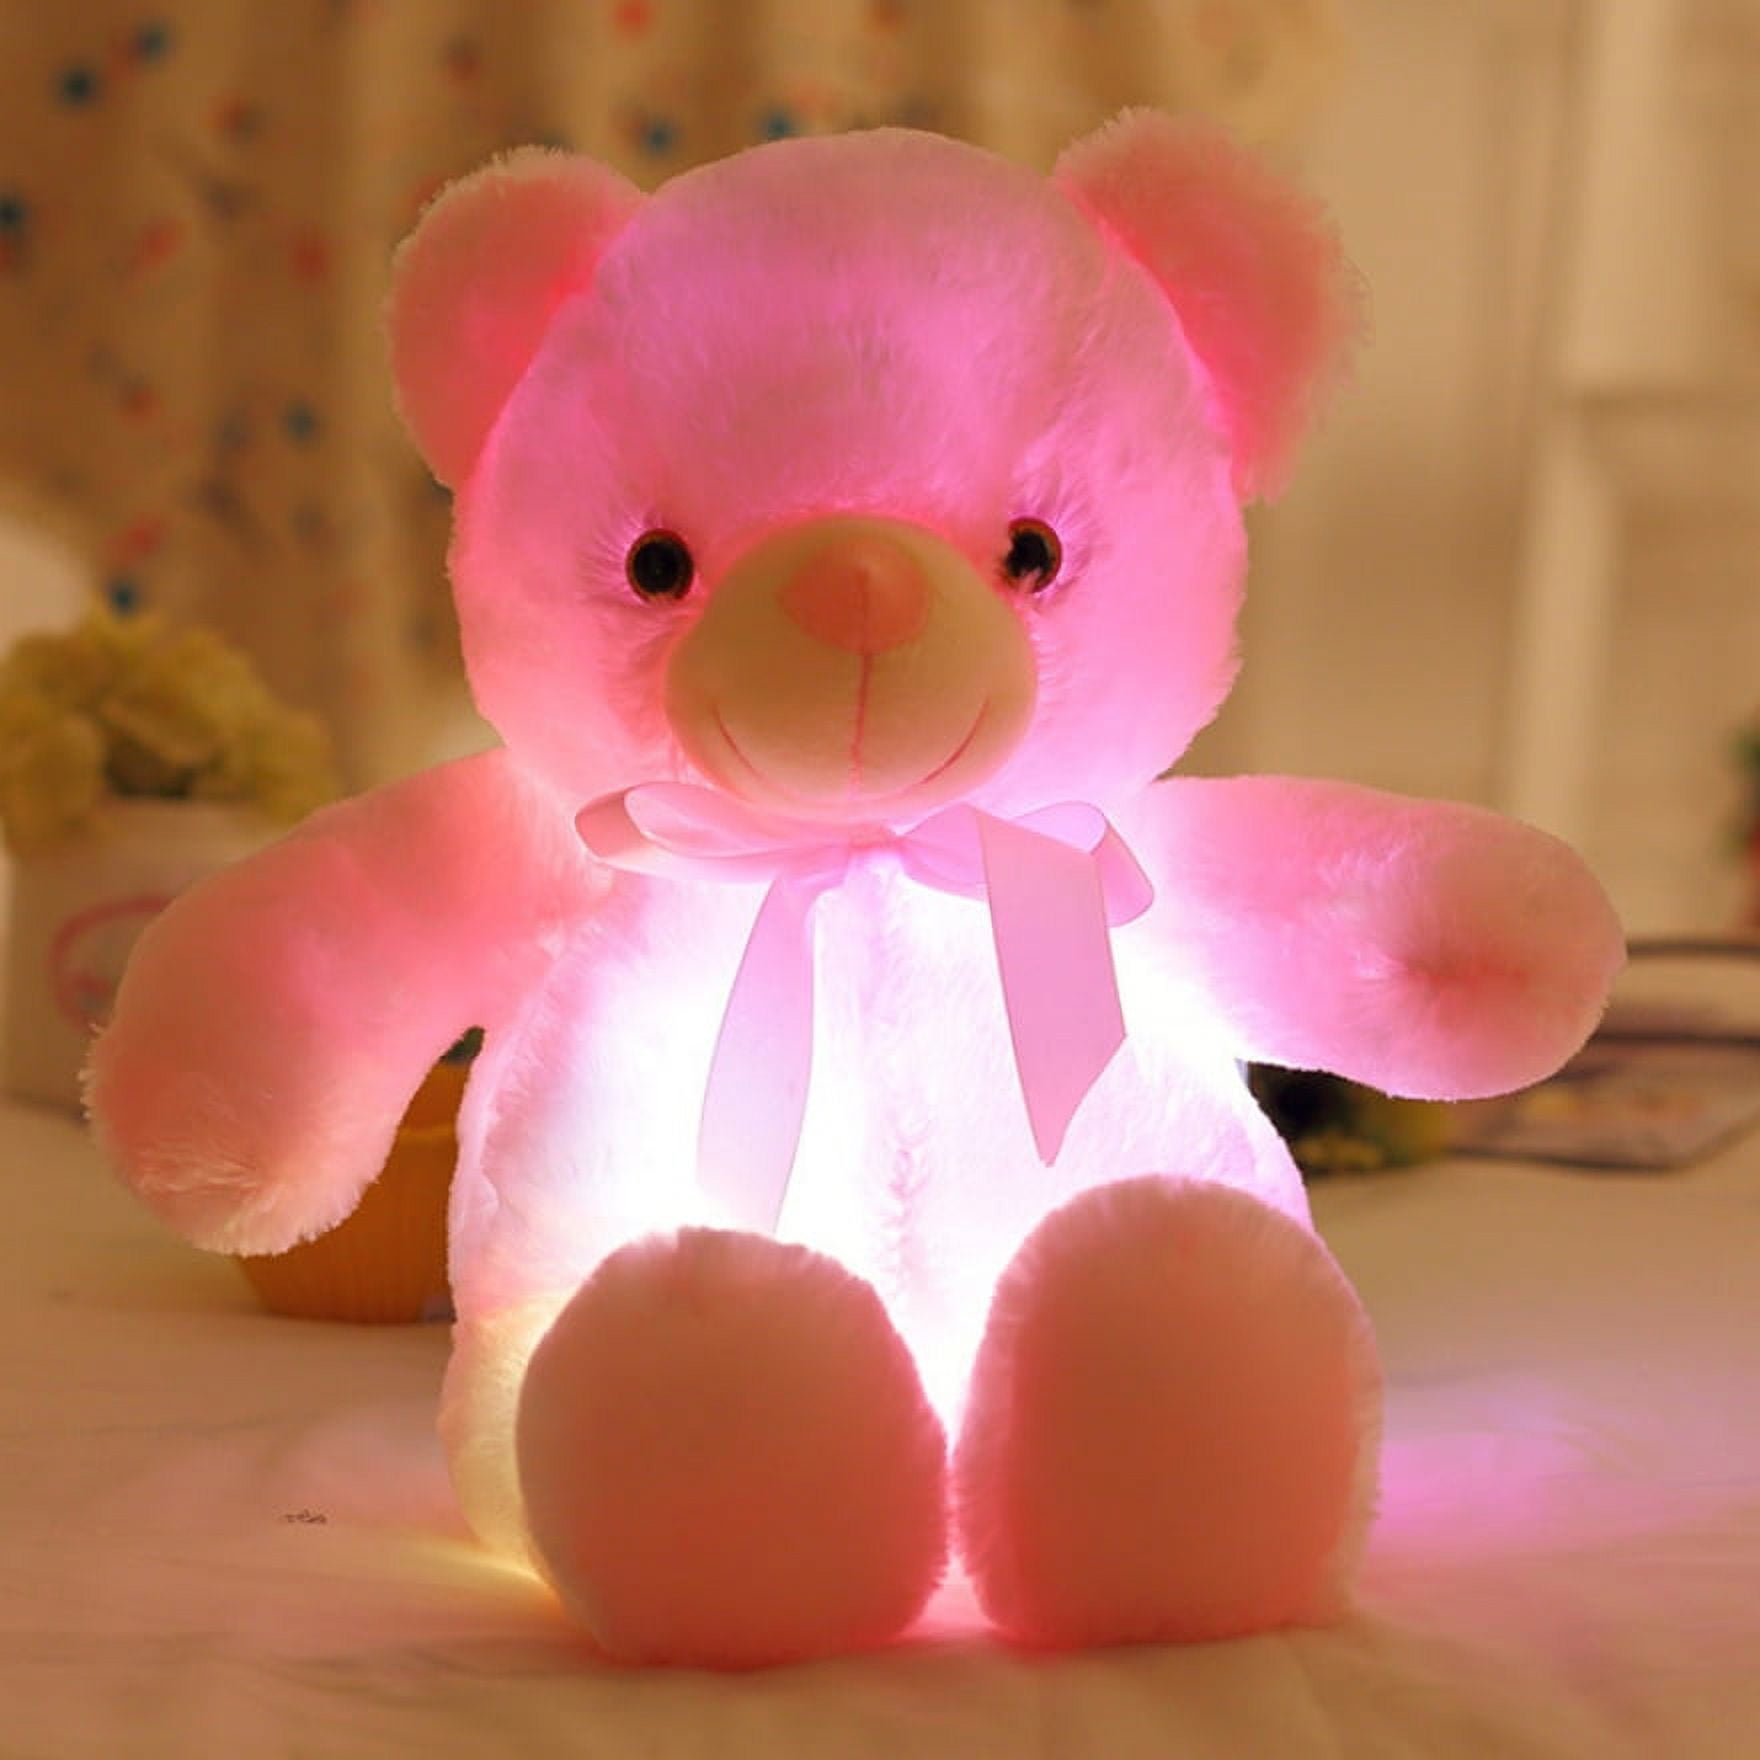 Bear For Soft Light Glow Animal New Kids Plush Creatives Adults LED Stuffed Toy Jzenzero Teddy Up with Bow-tie